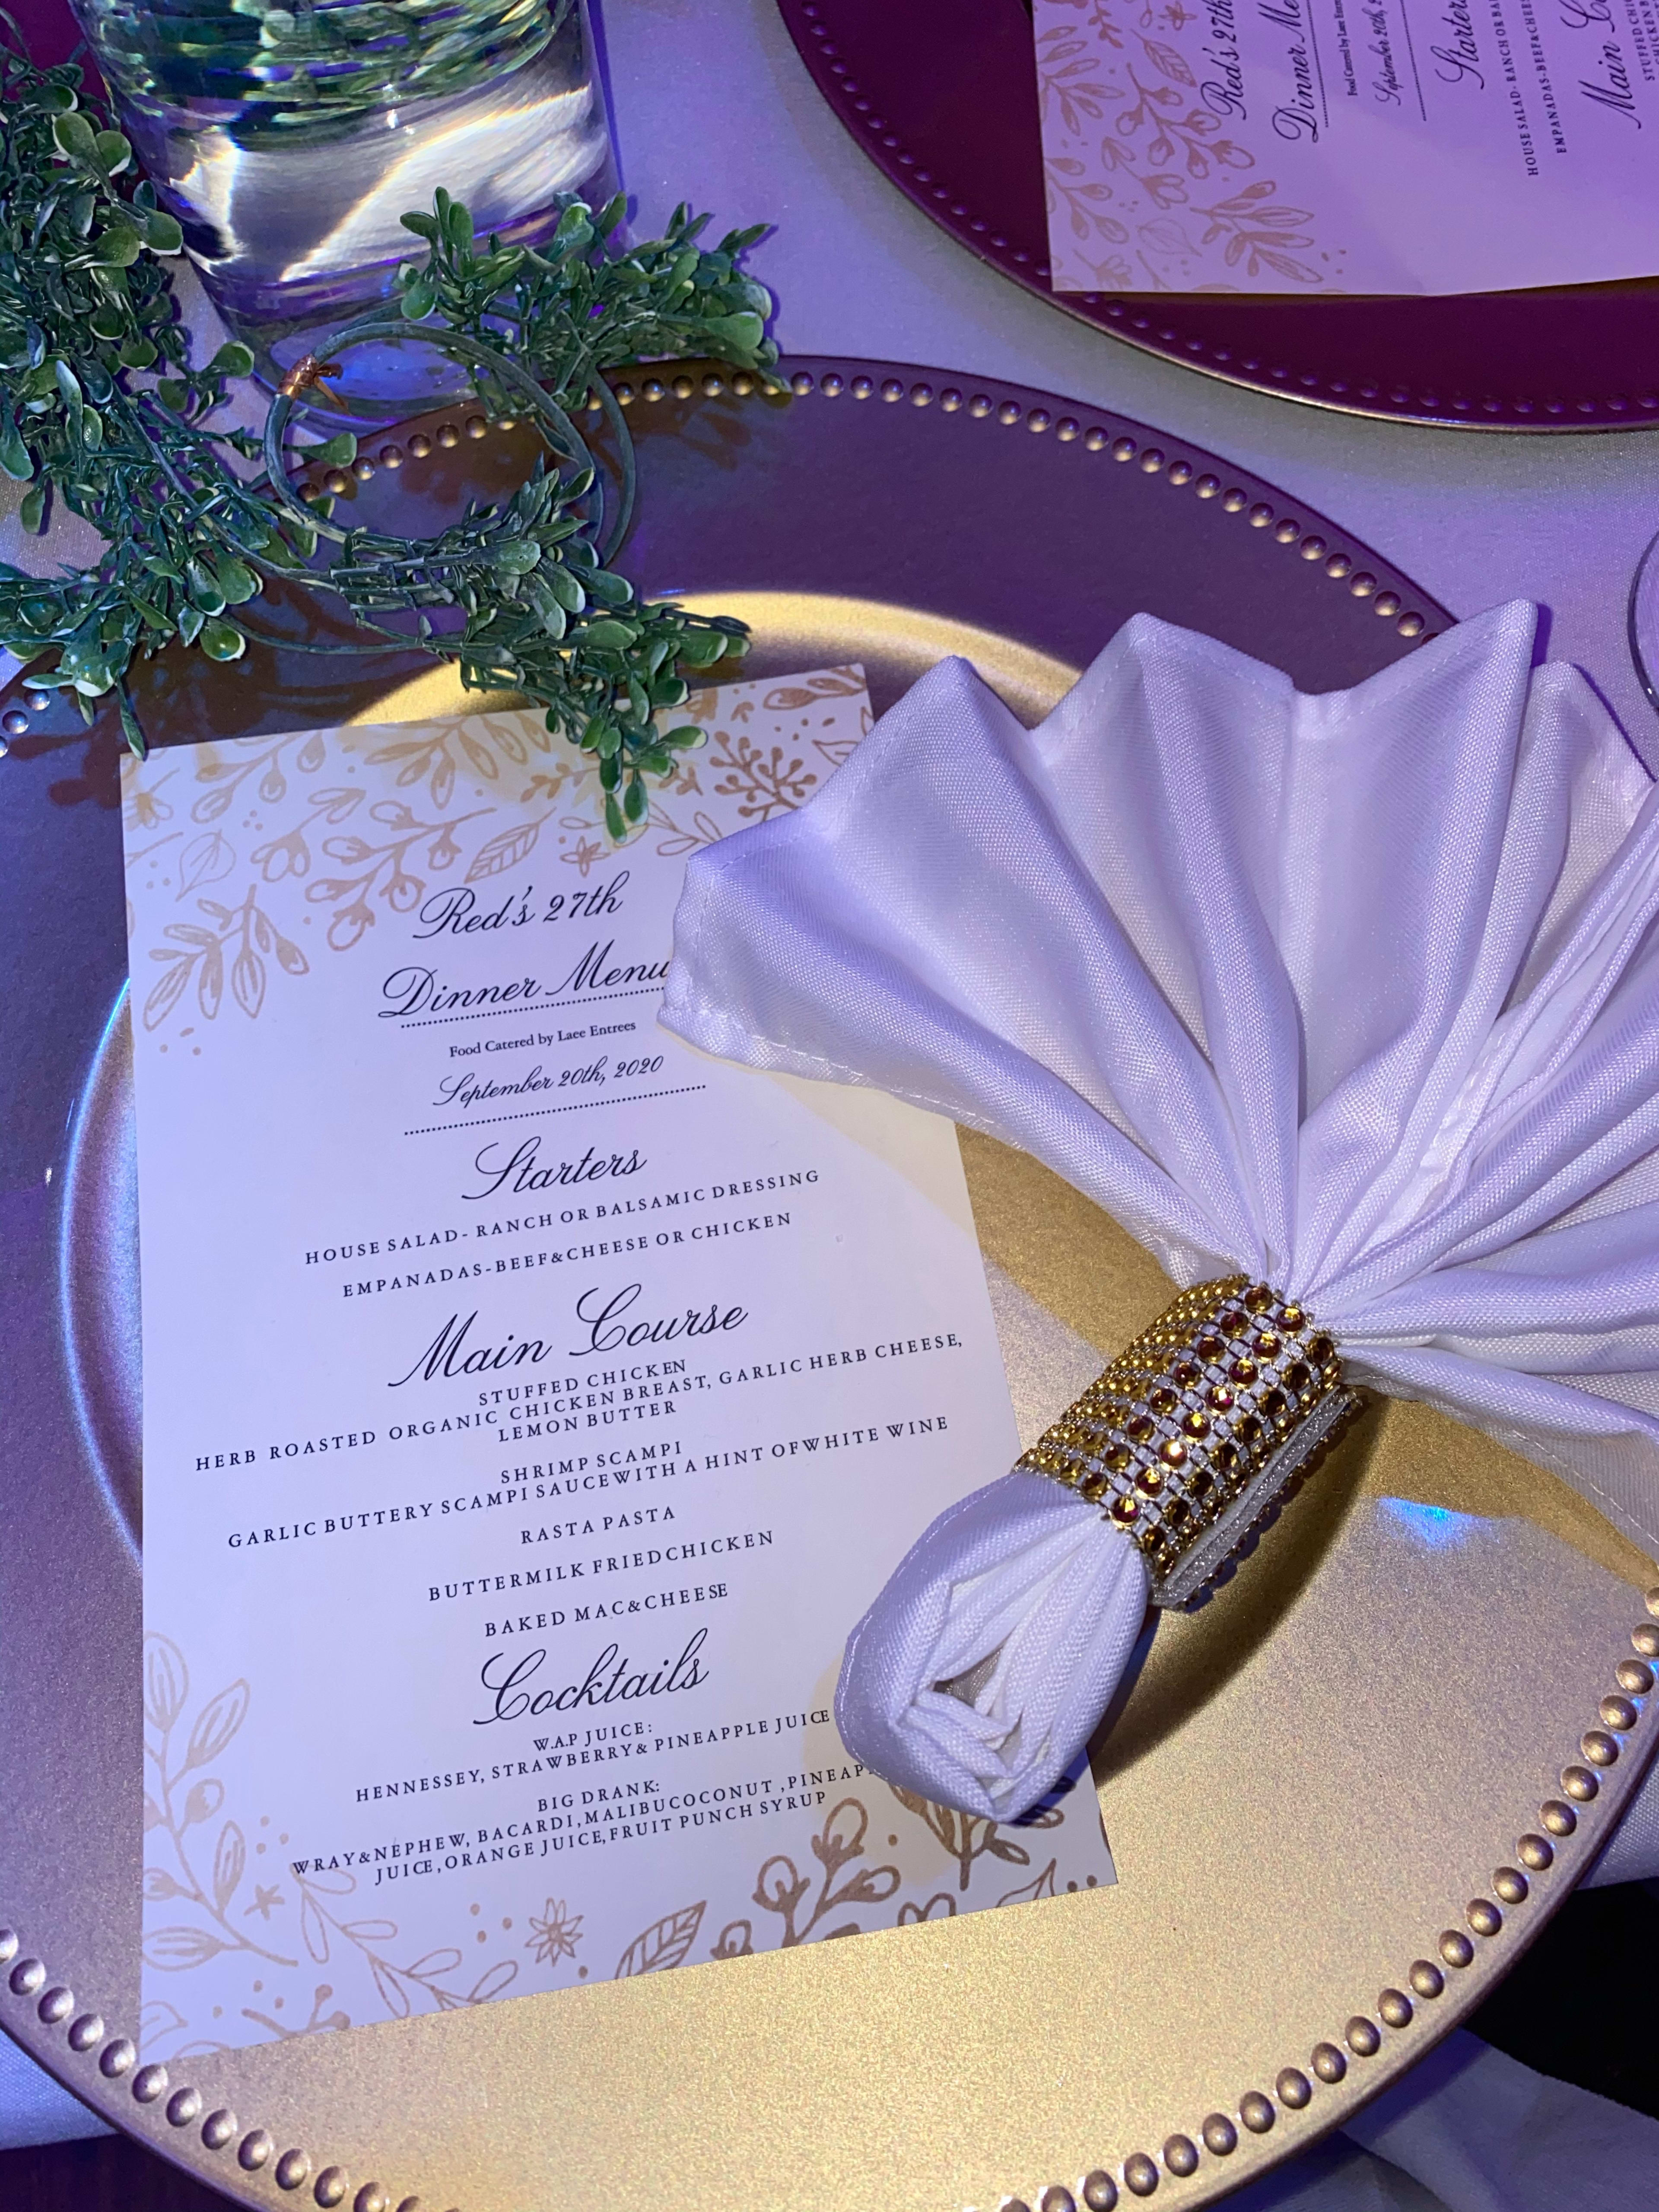 A purple and white dinner party table setting with a menu and napkin.